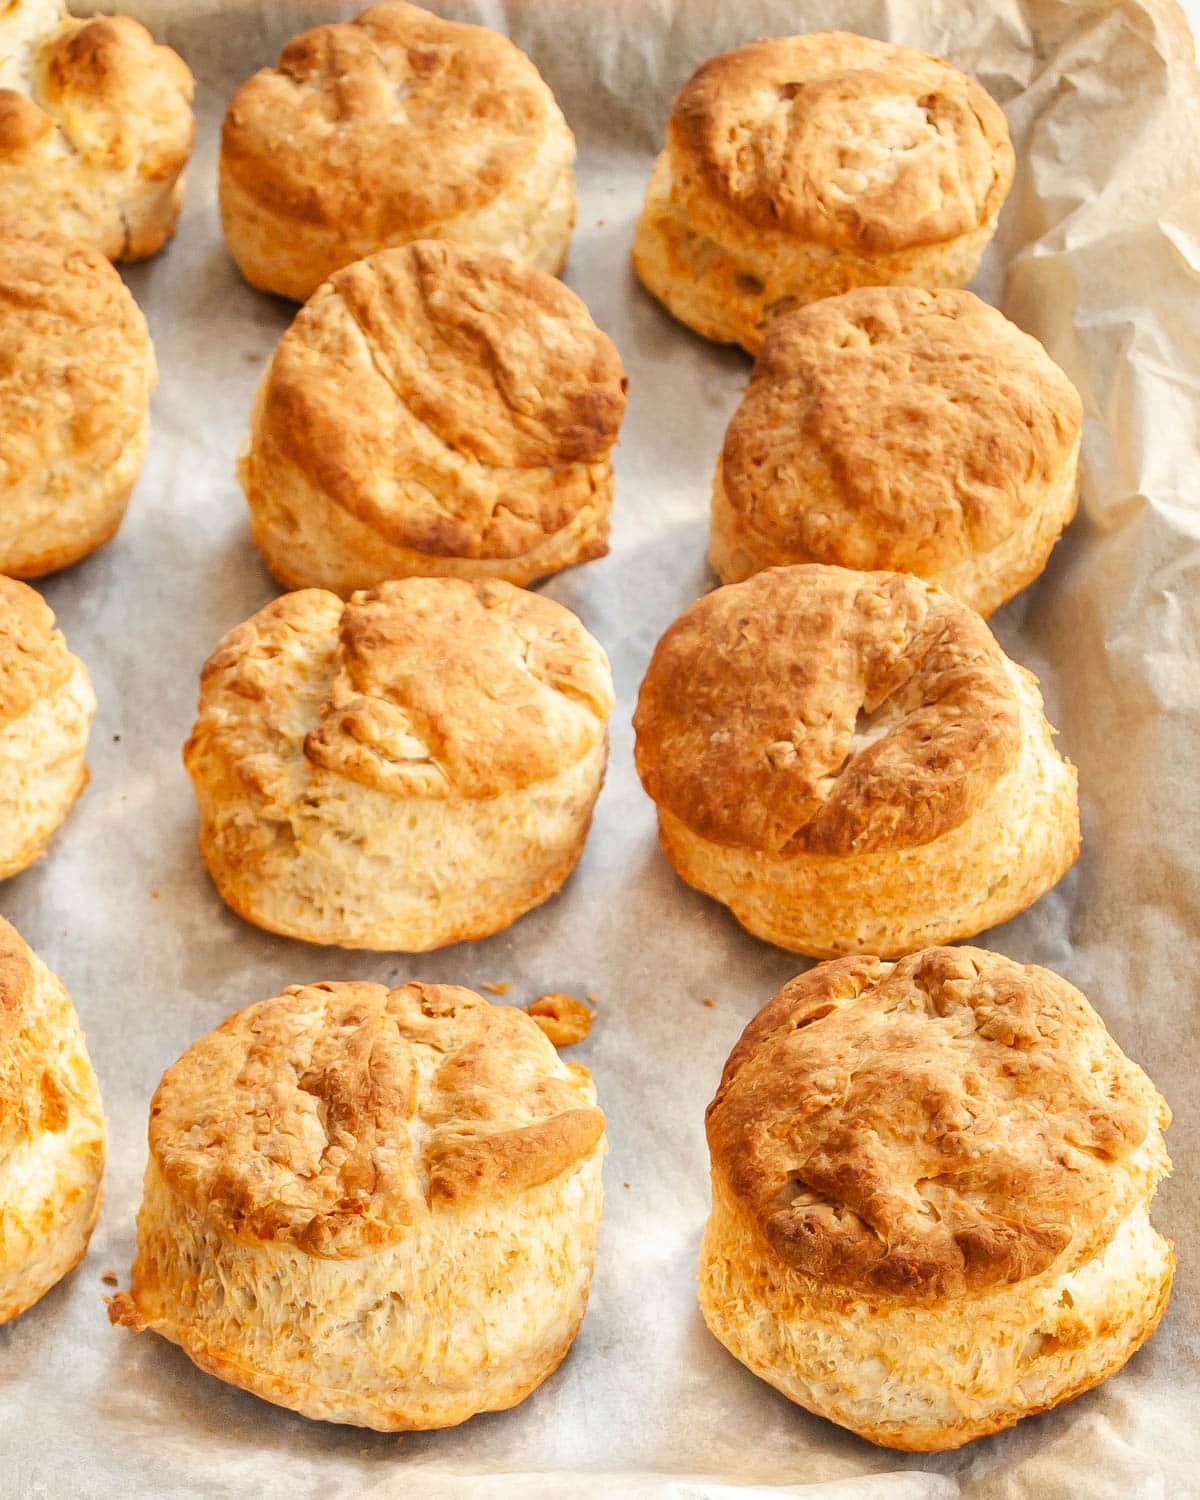 Buttermilk Parmesan Biscuits - Craving Home Cooked